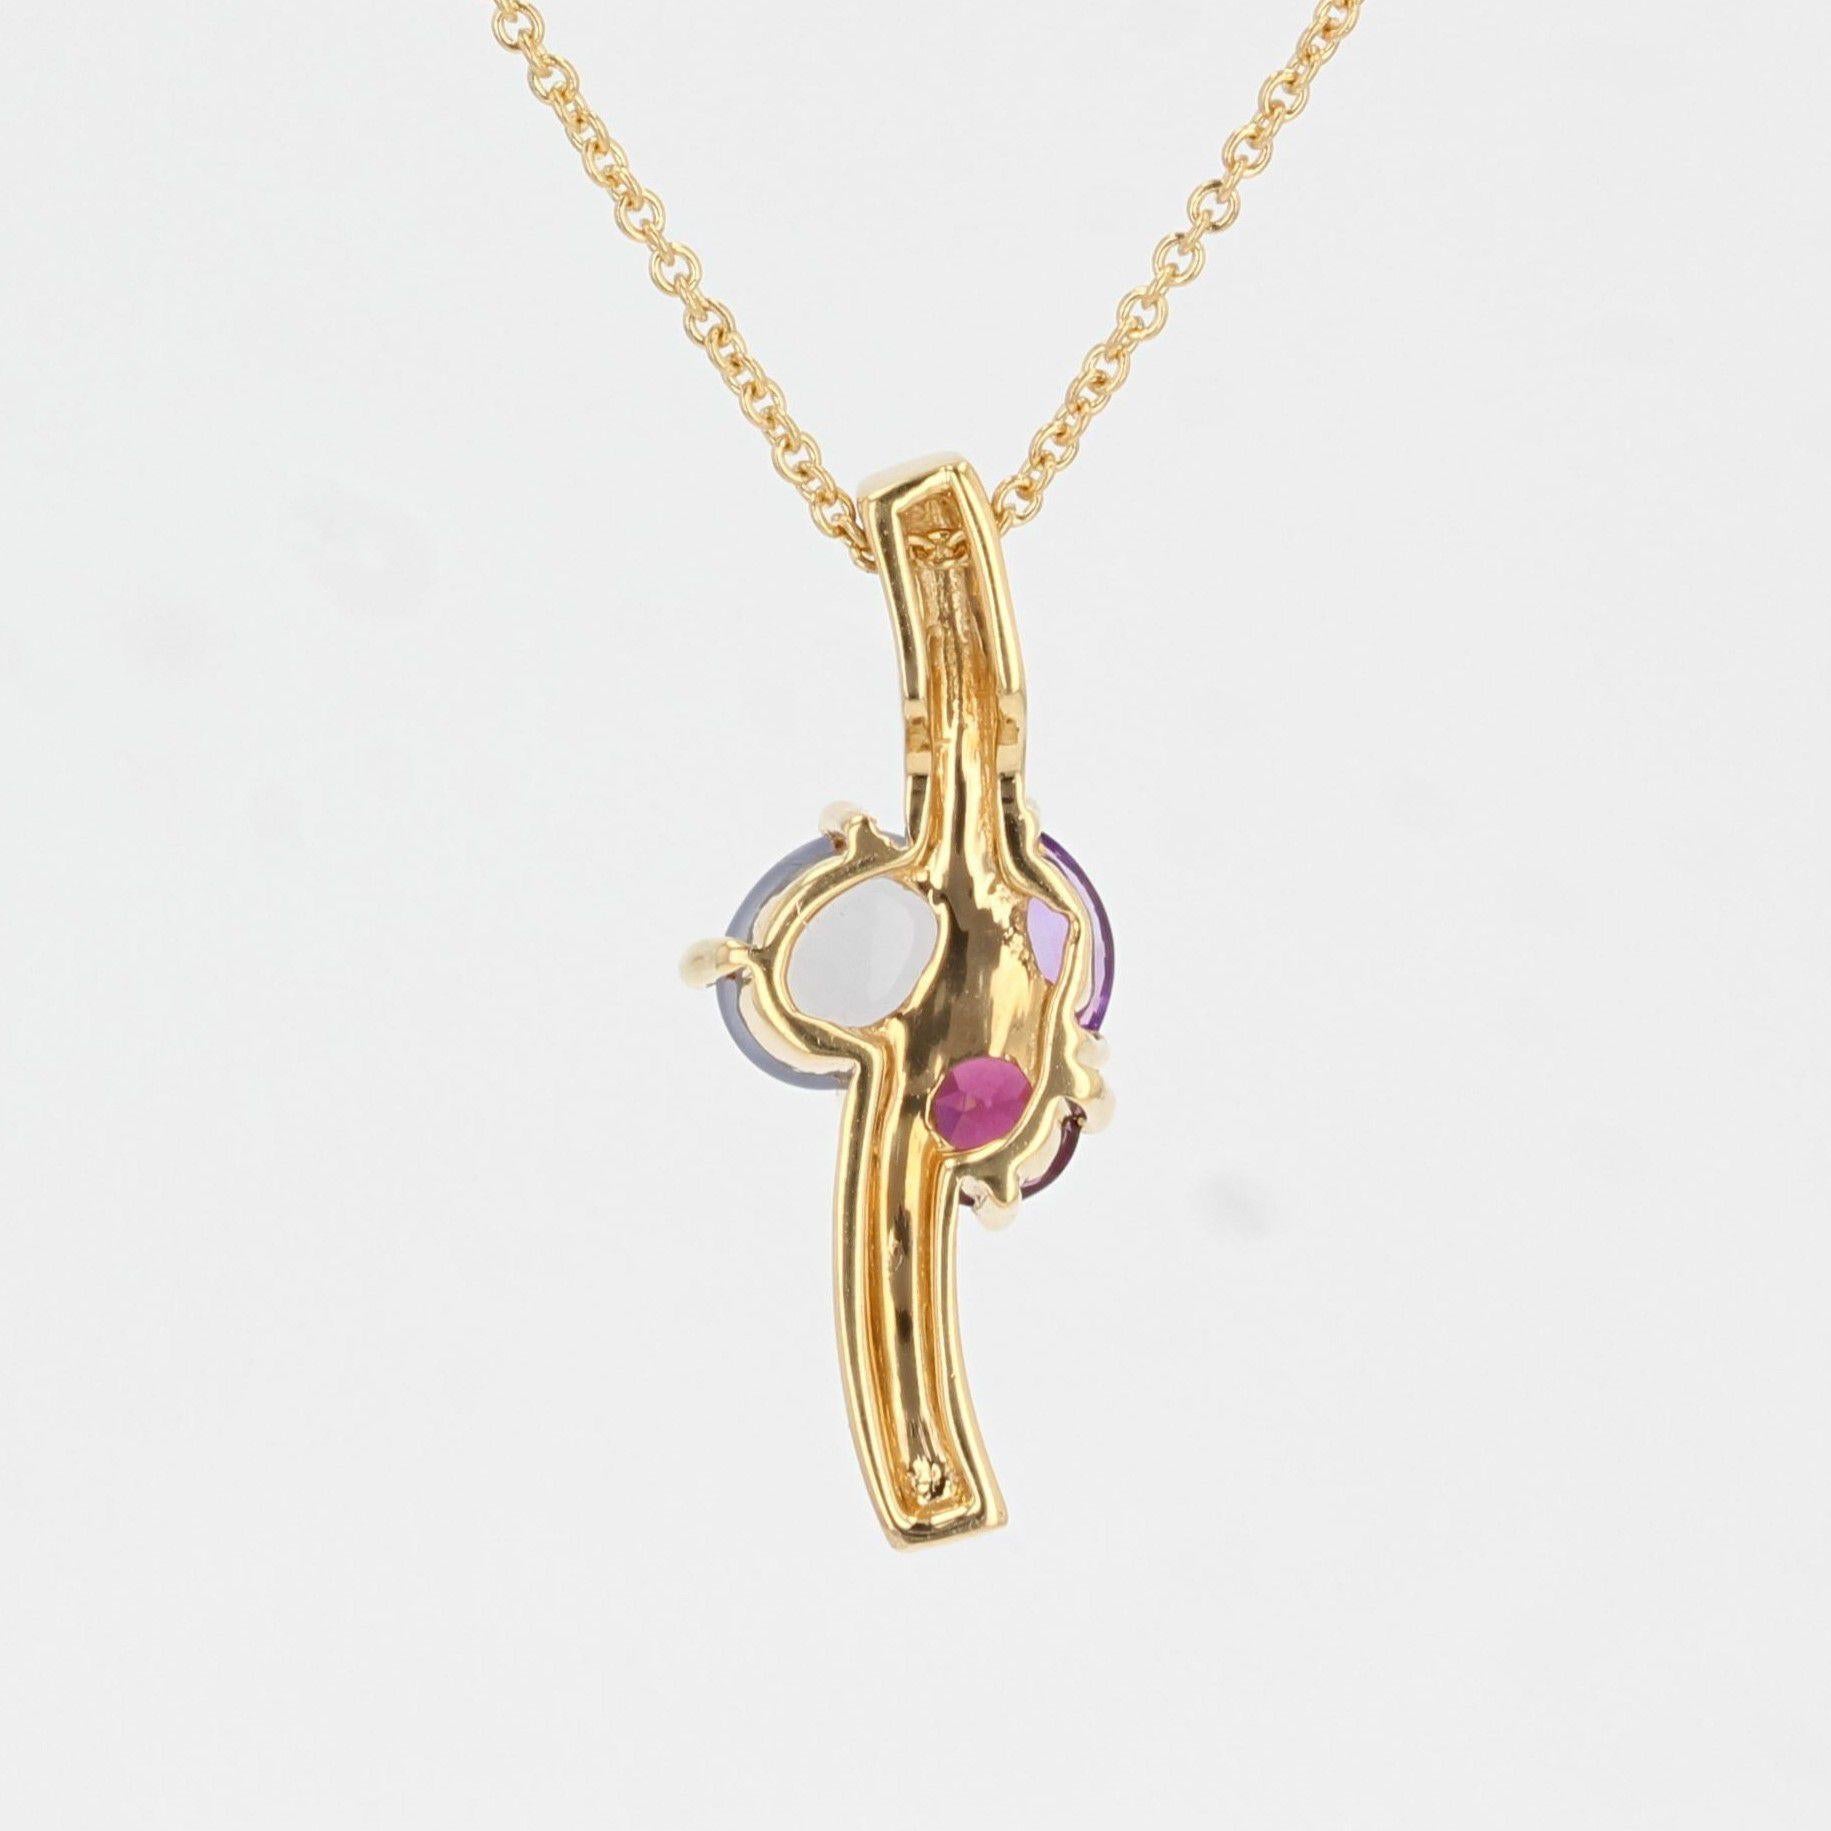 Modern Gemstone 18 Karat Yellow Gold Pendant and Chain In Excellent Condition For Sale In Poitiers, FR